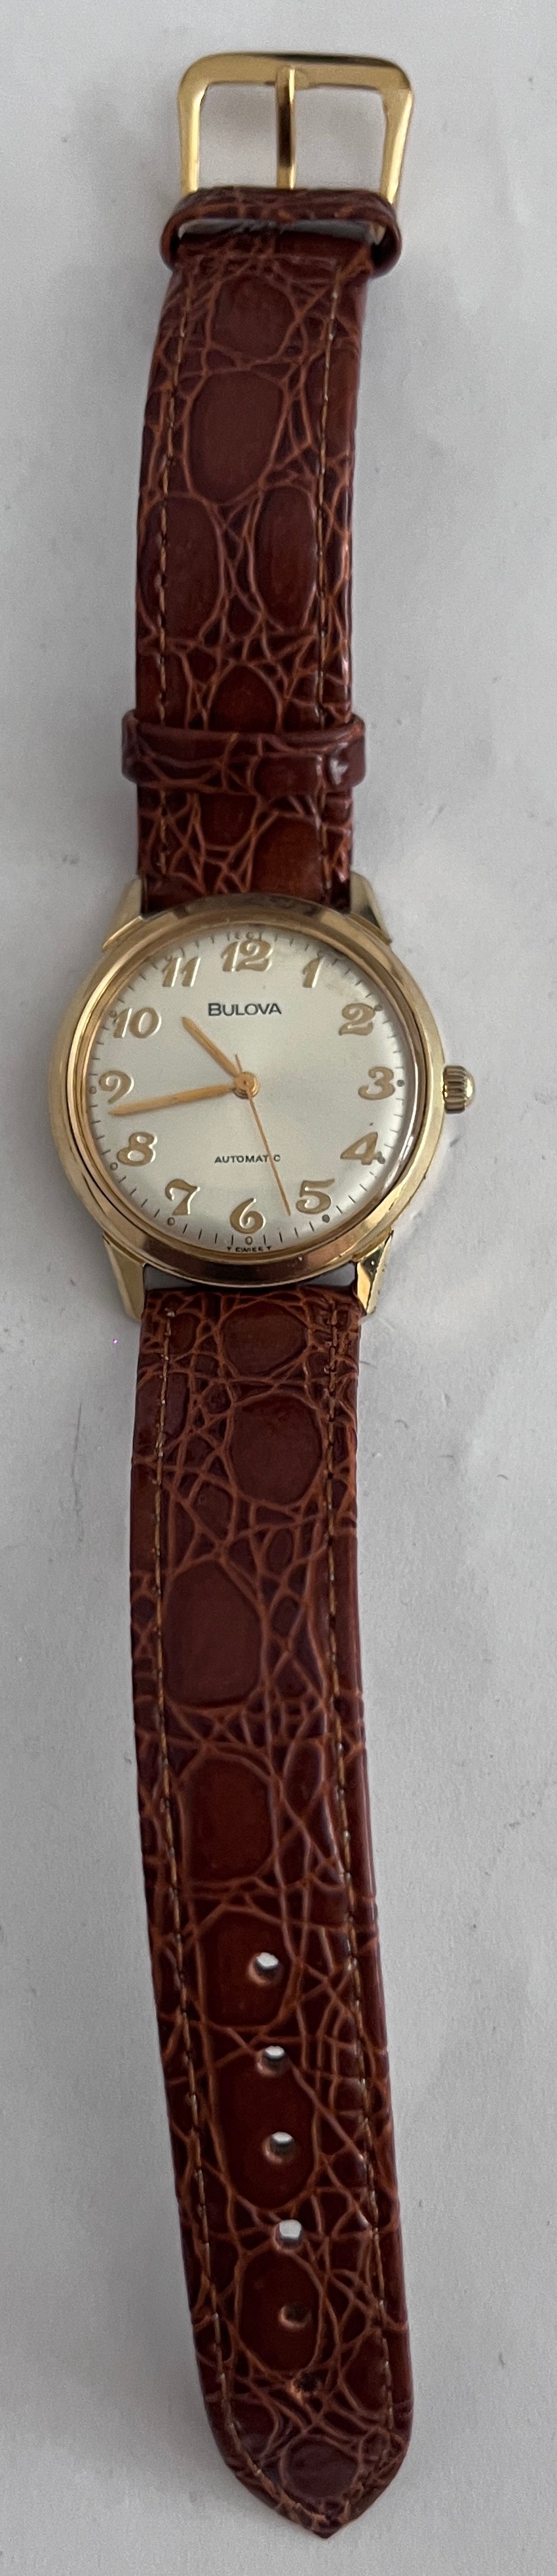 A 1974 vintage automatic Bulova wristwatch, gold plated on brown leather strap with silver face. - Bild 2 aus 5